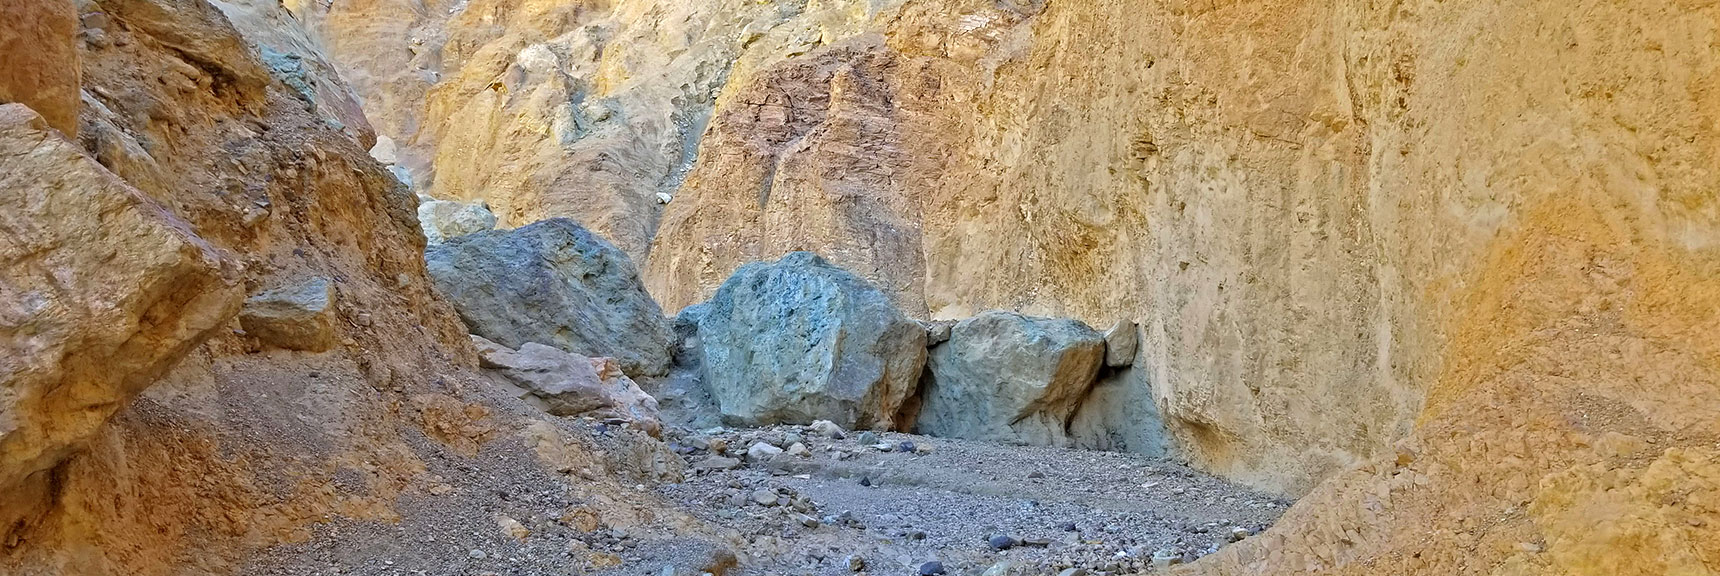 Huge Boulders to Navigate in 2nd Dip Canyon | Artists Drive Hidden Canyon Hikes | Death Valley National Park, California